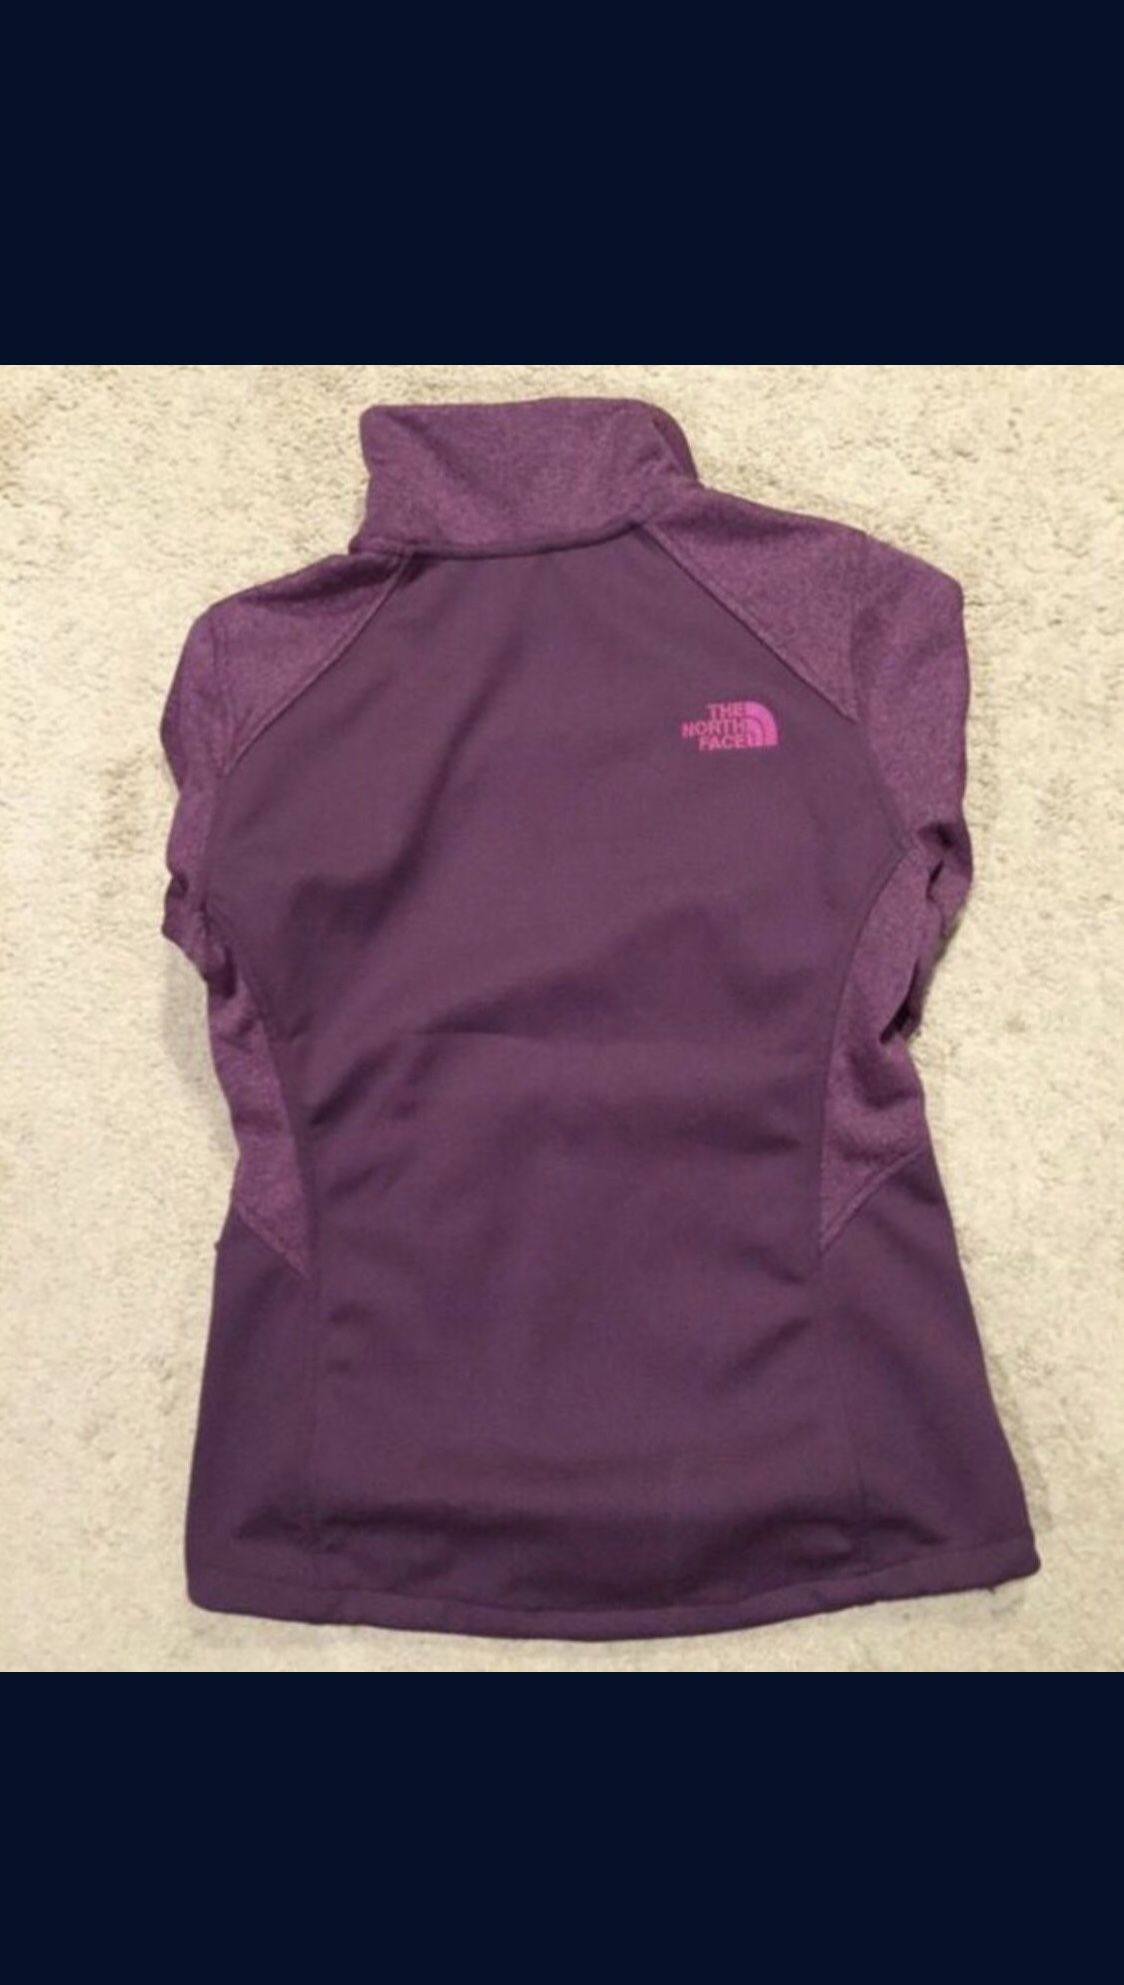 North Face / Thin Softshell Track Jacket Coat / SIZE: Women's Small / Like New w/o Tags! / Heathered Purple & Pink